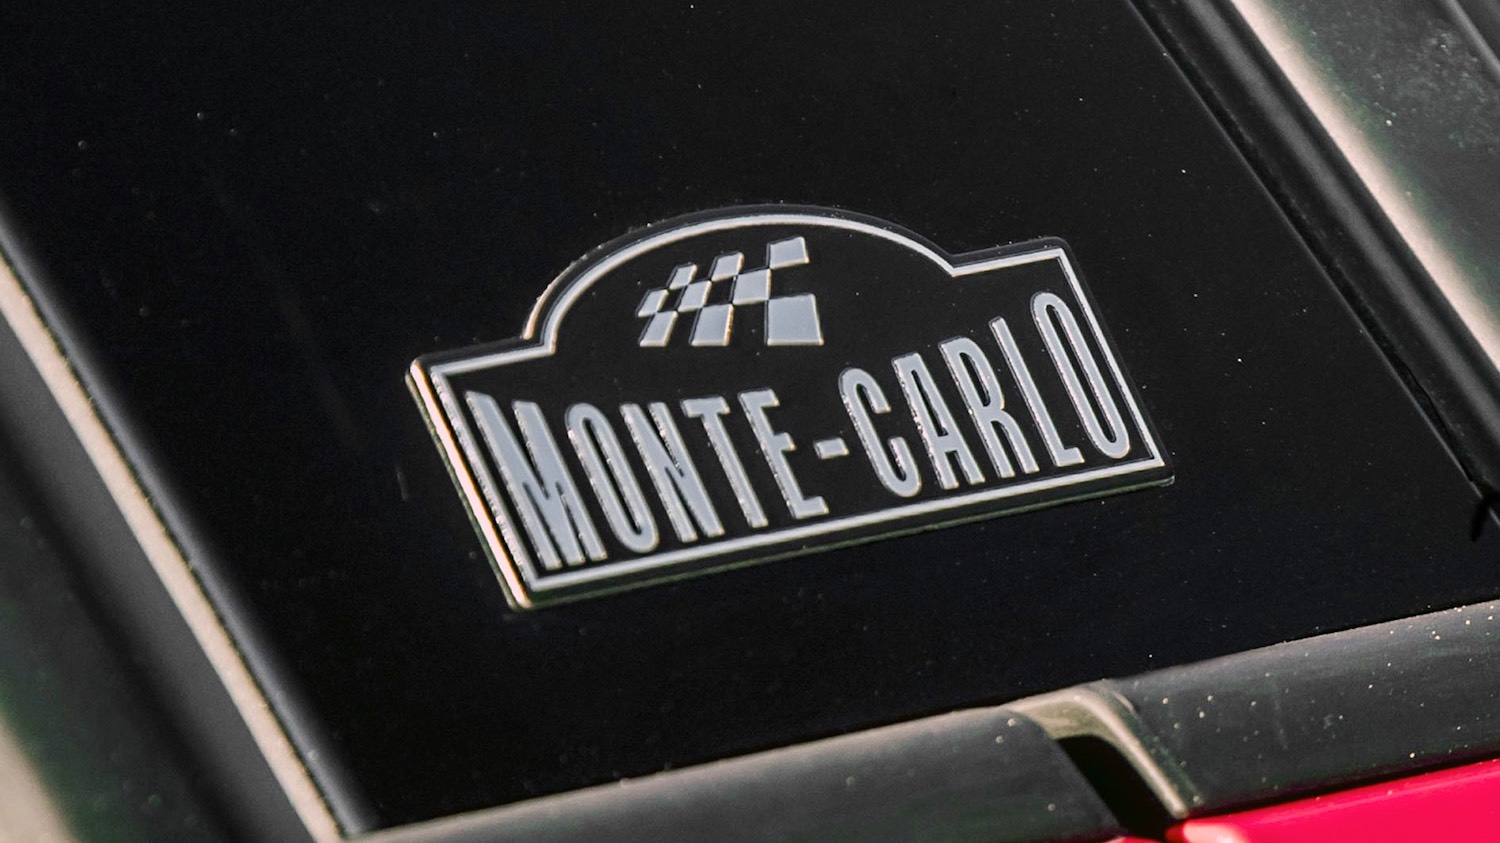 Tim Barnes Clay reviews the upated Skoda Fabia Monte Carlo for drive 1